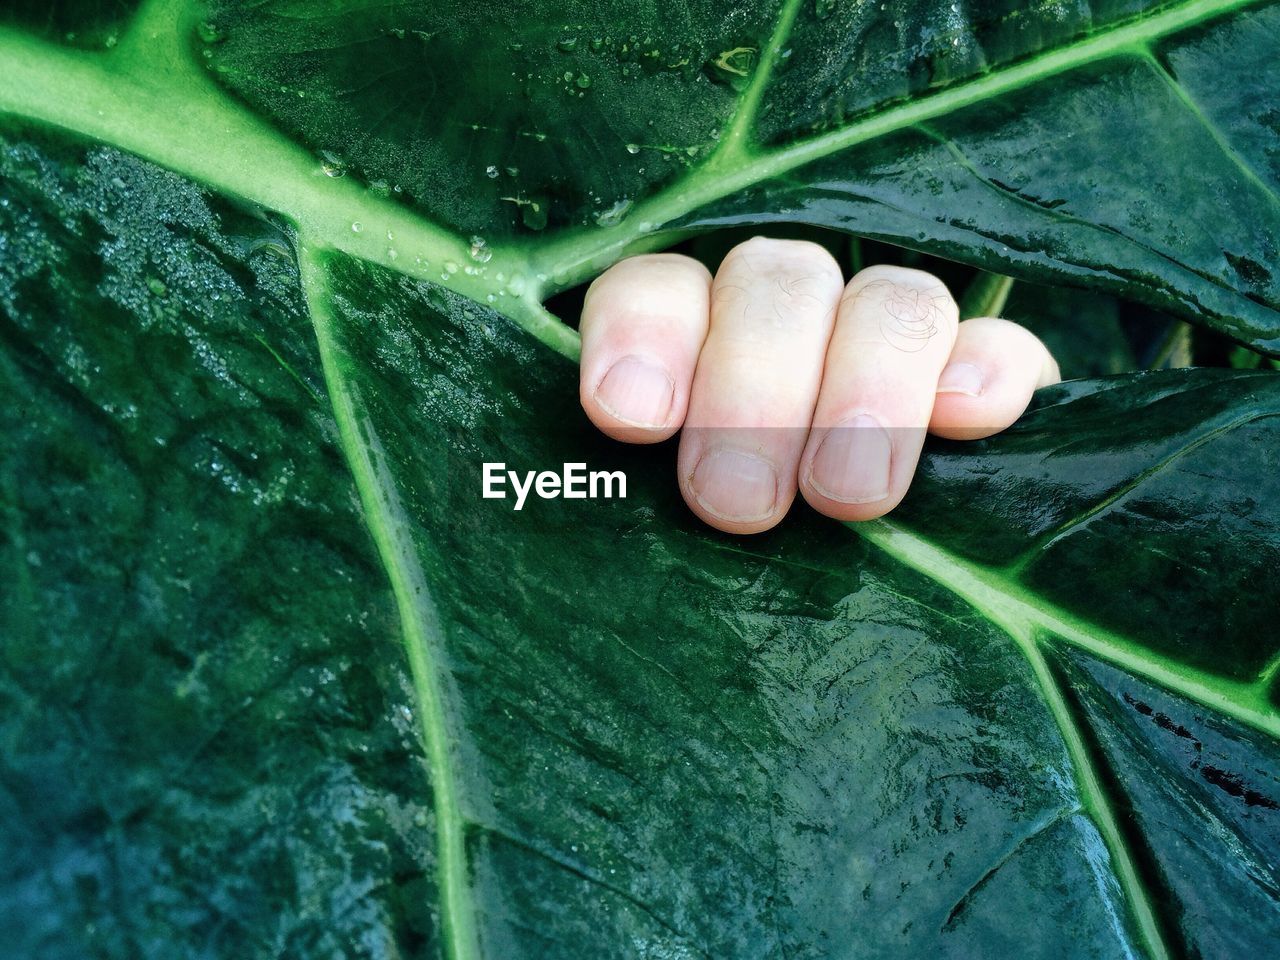 Cropped image of hand on green leaf